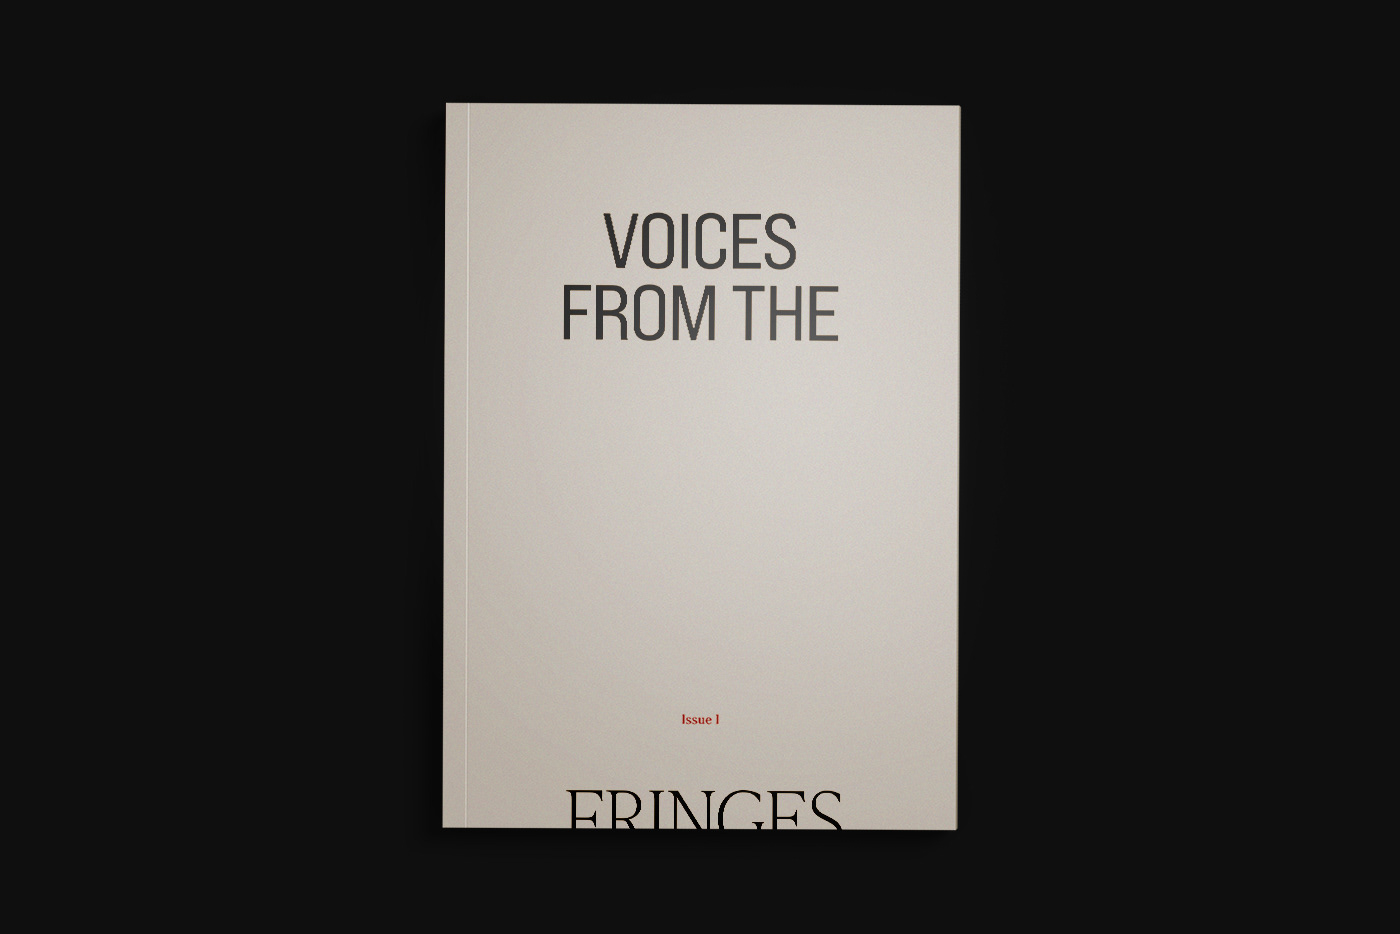 Cover of the publication, "Voices from the Fringes"